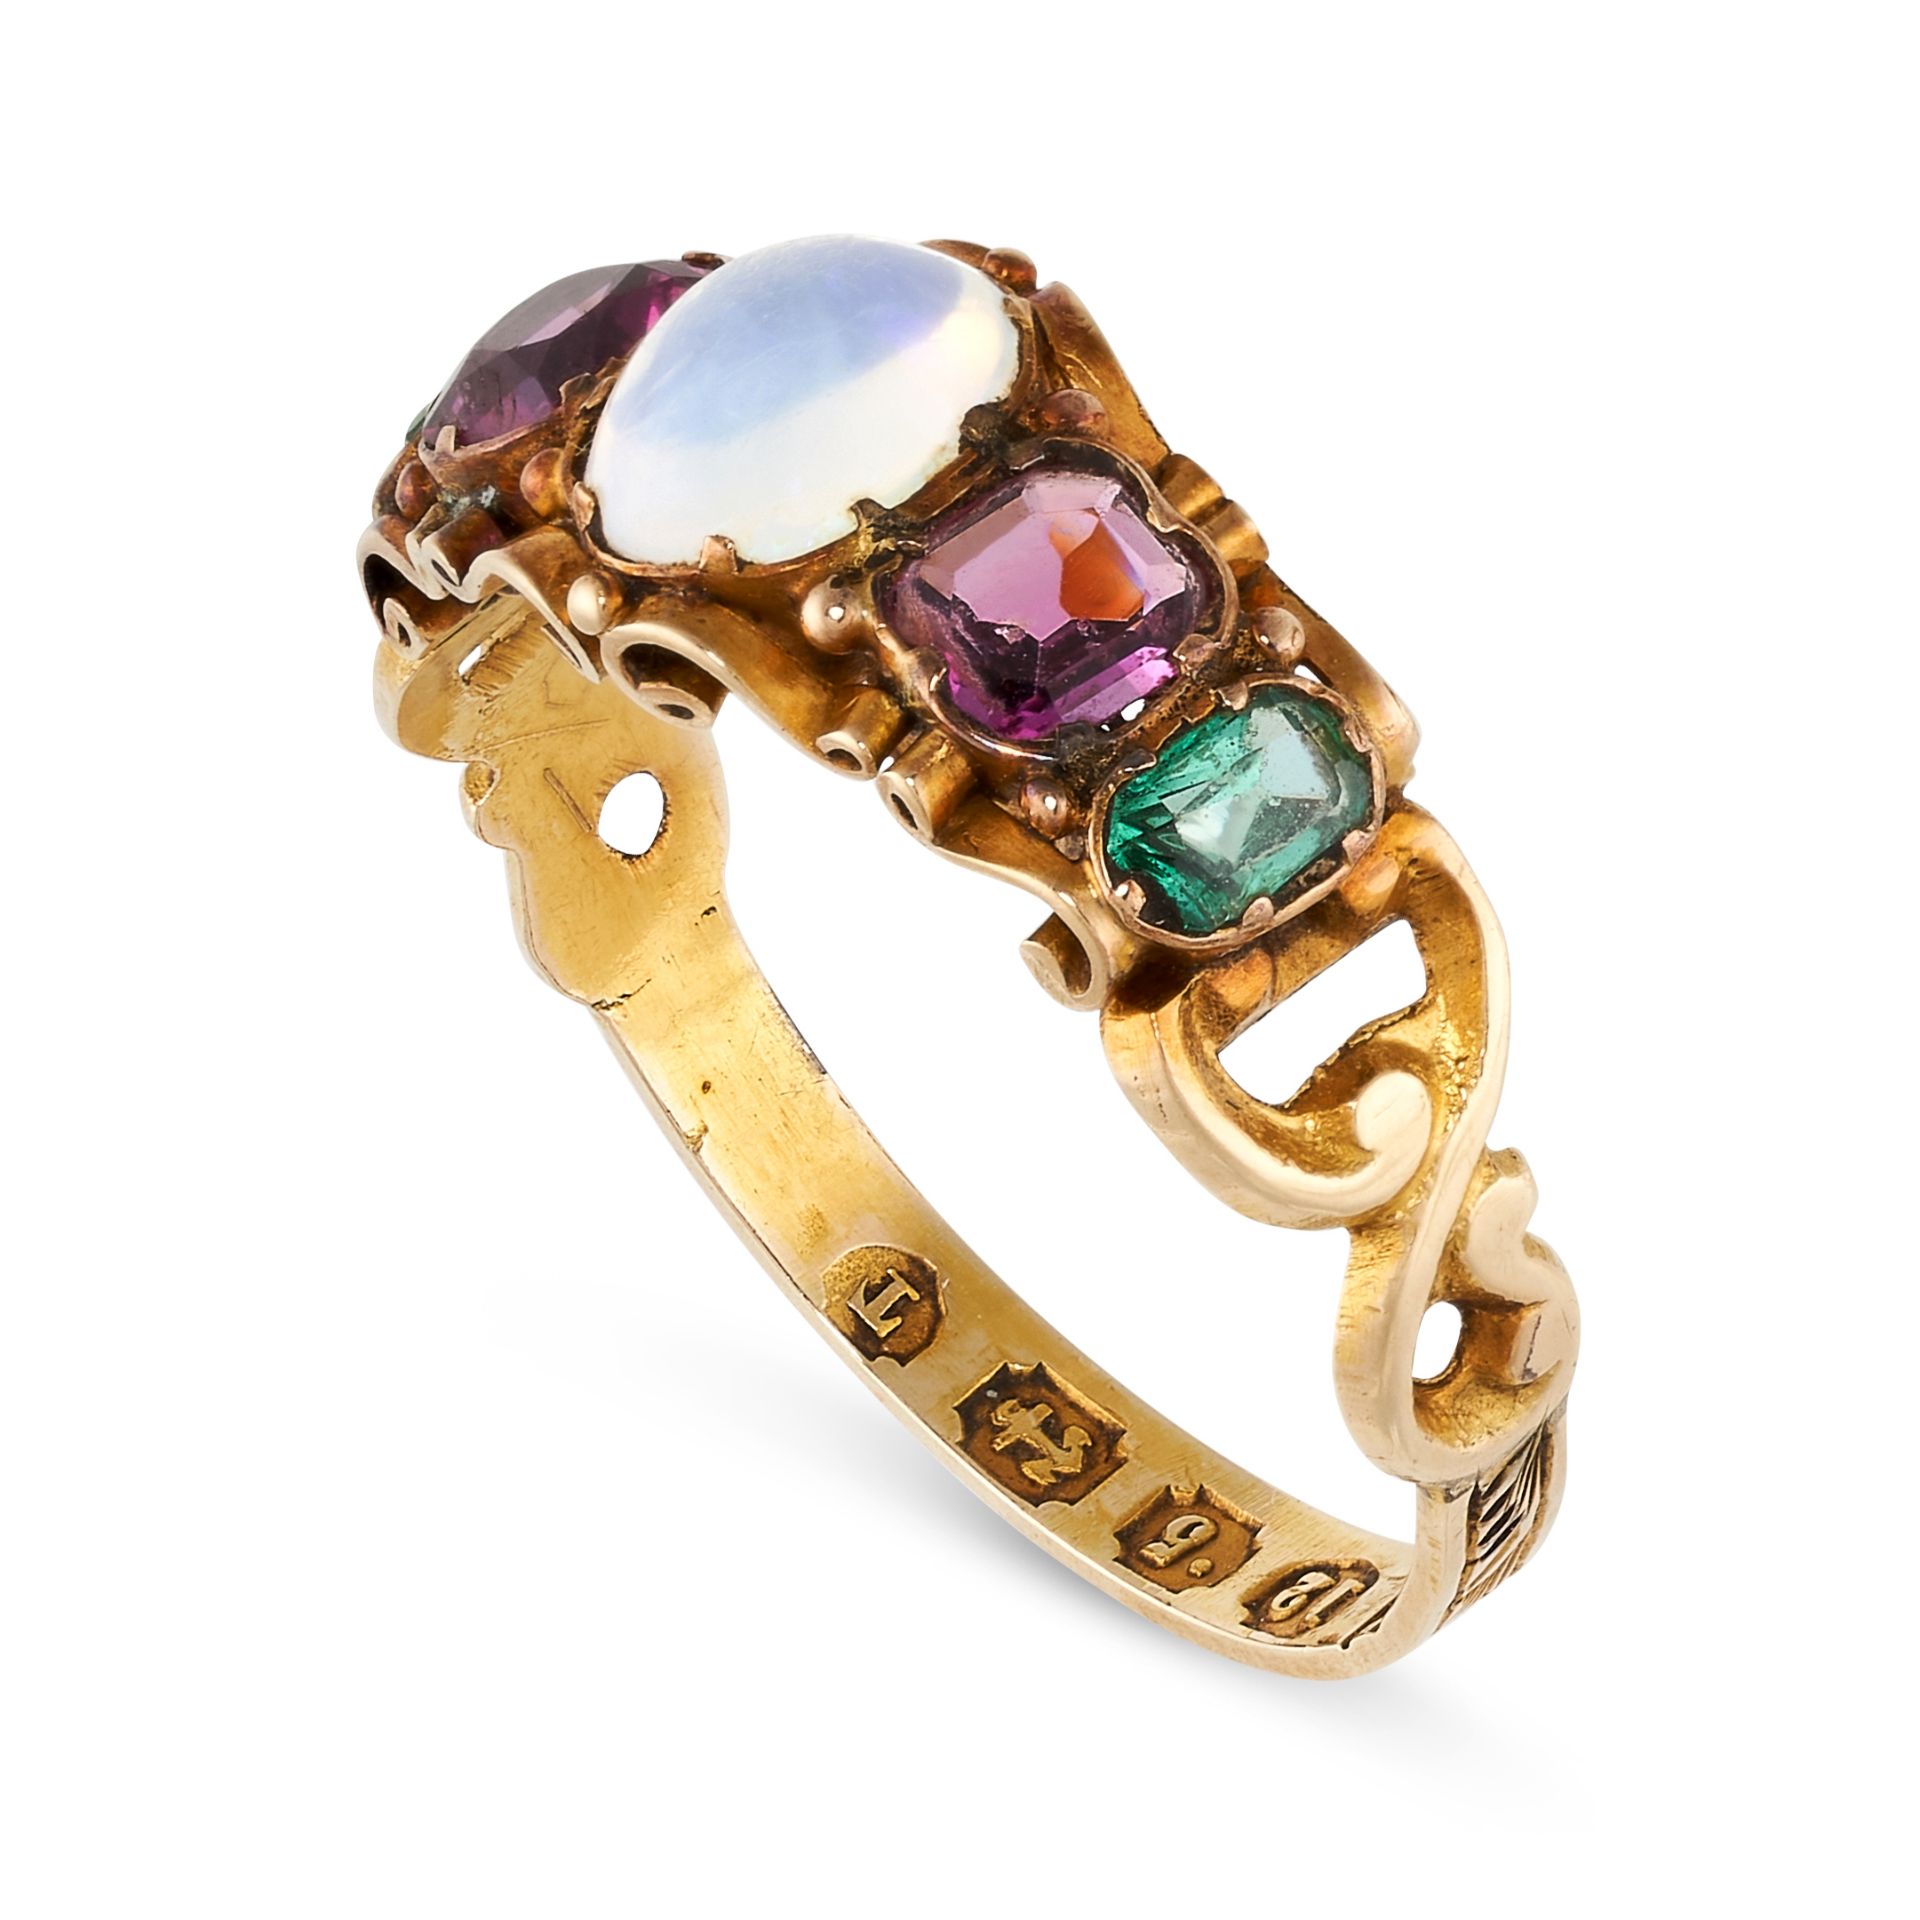 NO RESERVE - AN ANTIQUE VICTORIAN OPAL, GARNET AND EMERALD RING 1868 in 12ct yellow gold, set with - Image 2 of 2